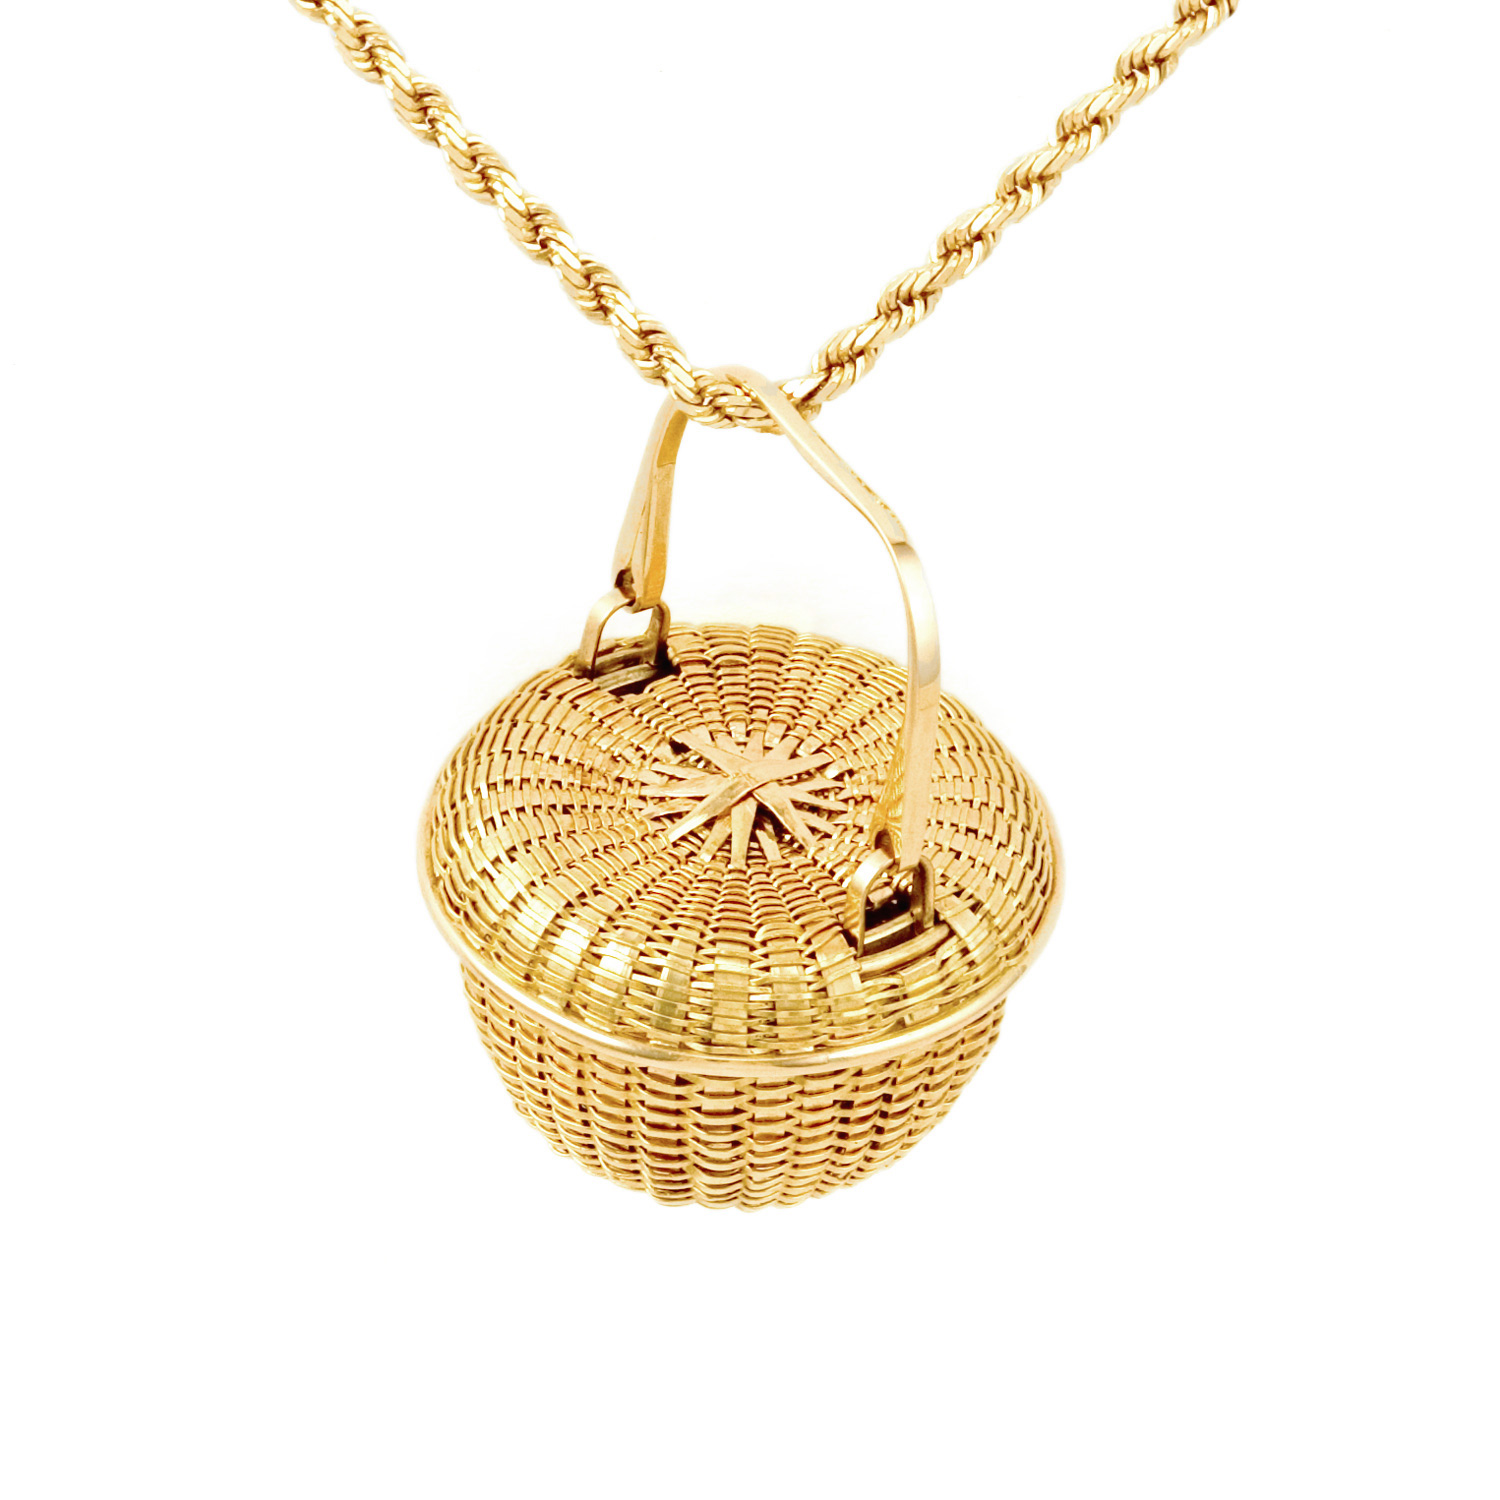 Covered Swing Handle Basket Pendant in 18k & 22k gold by Tamberlaine